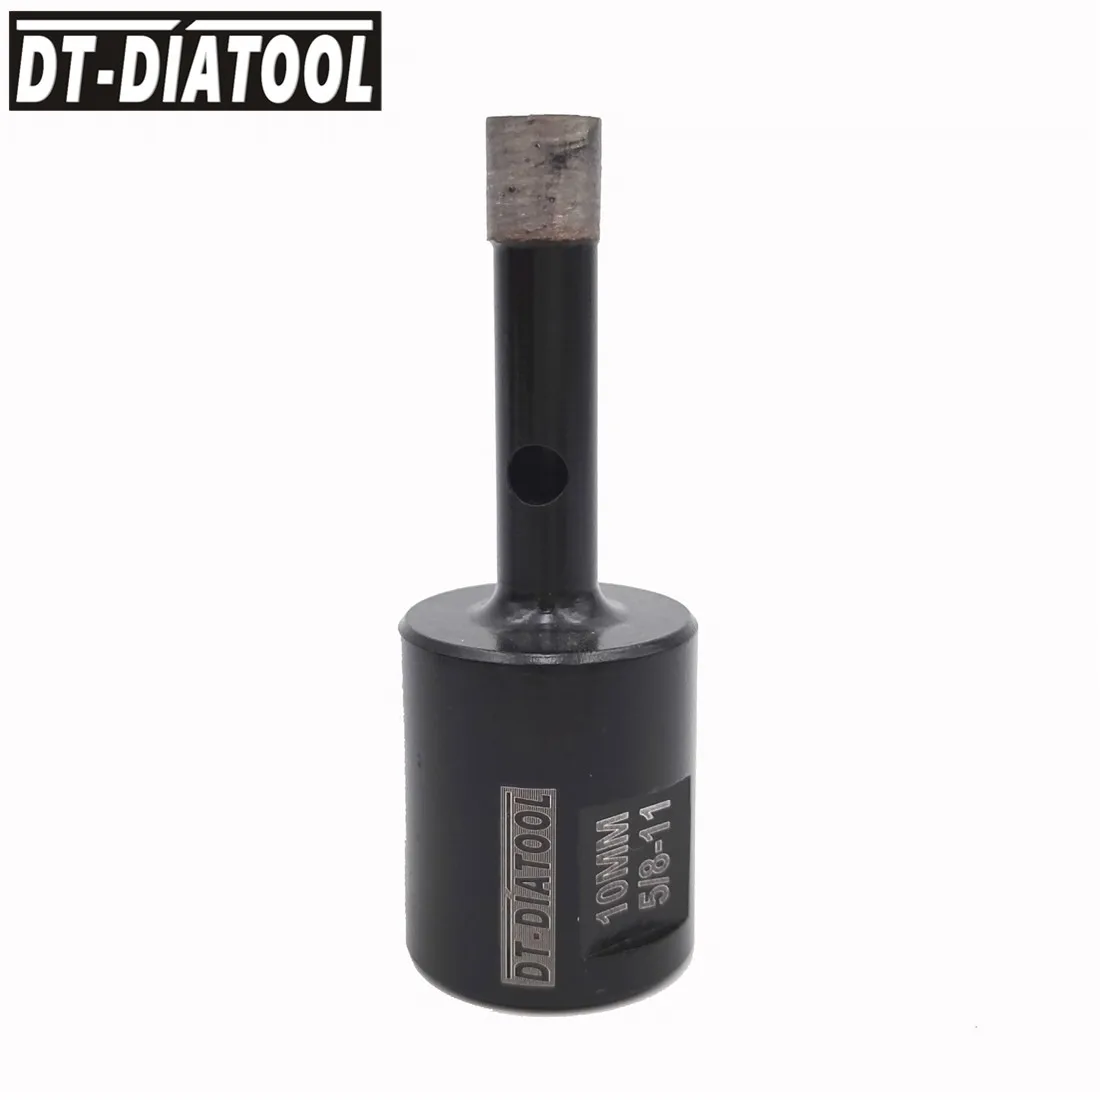 DT-DIATOOL 1pc 5/8-11 Thread Dia10mm Welded Solid Segments Diamond Drilling Core Bits Wet for Granite Marble Drill Bits Hole Saw